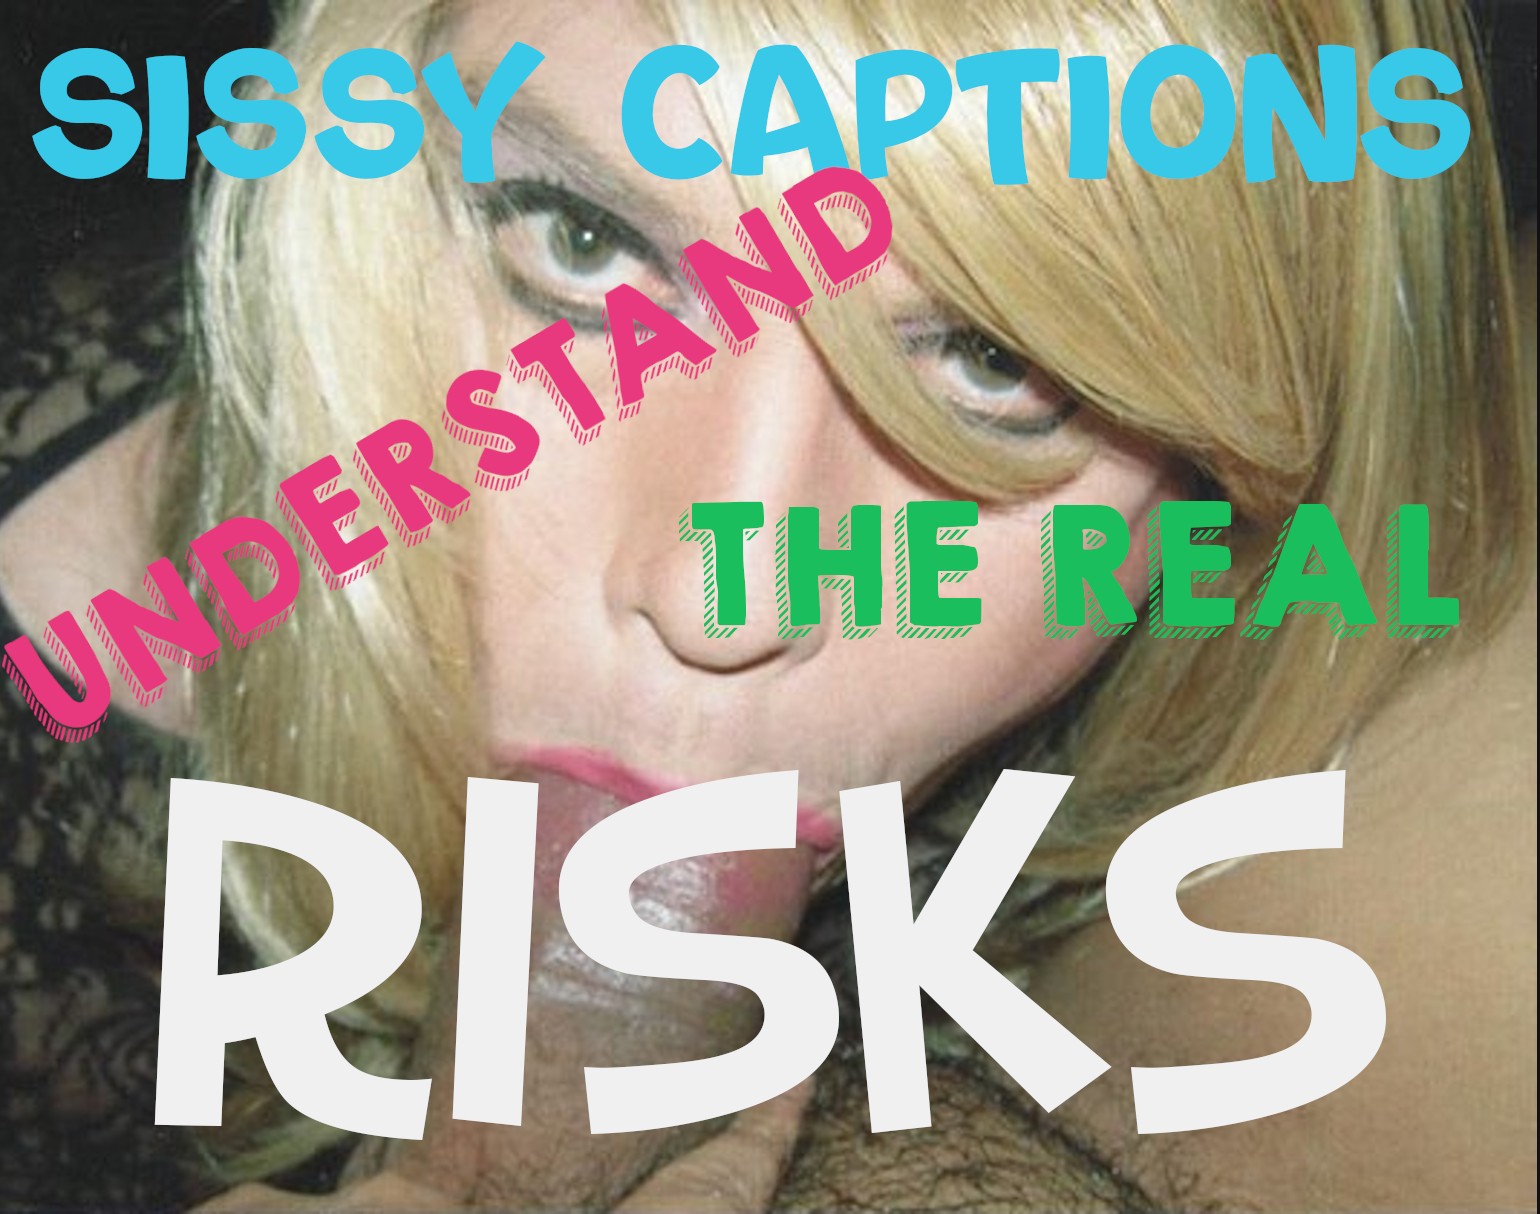 Reality Porn Captions - The real risks of sissy captions - Freakden